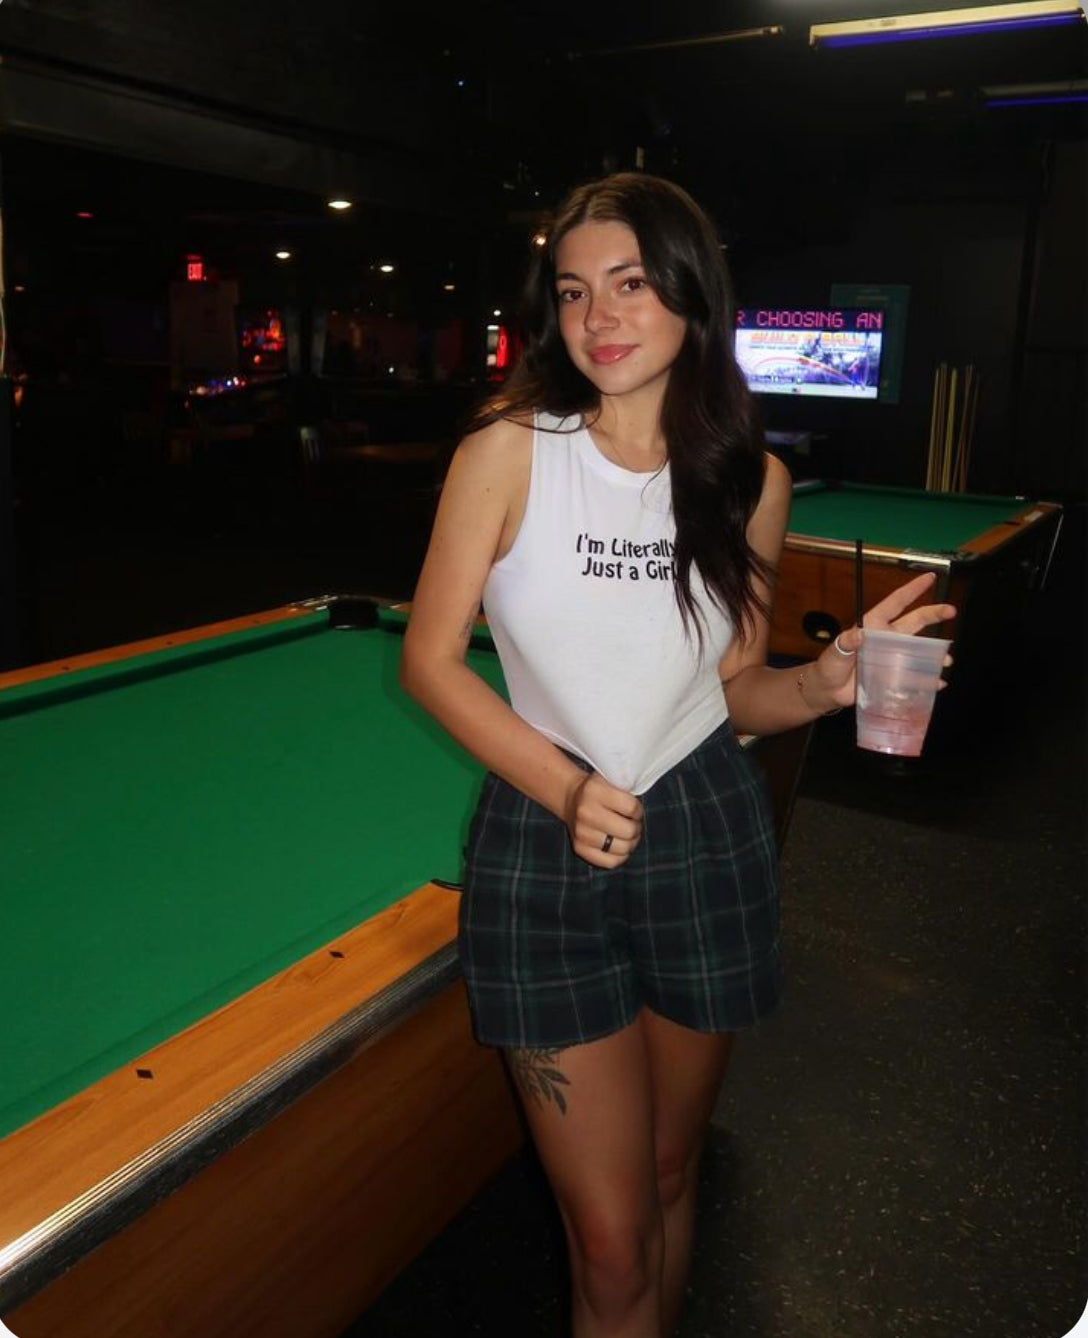 a woman standing next to a pool table holding a drink